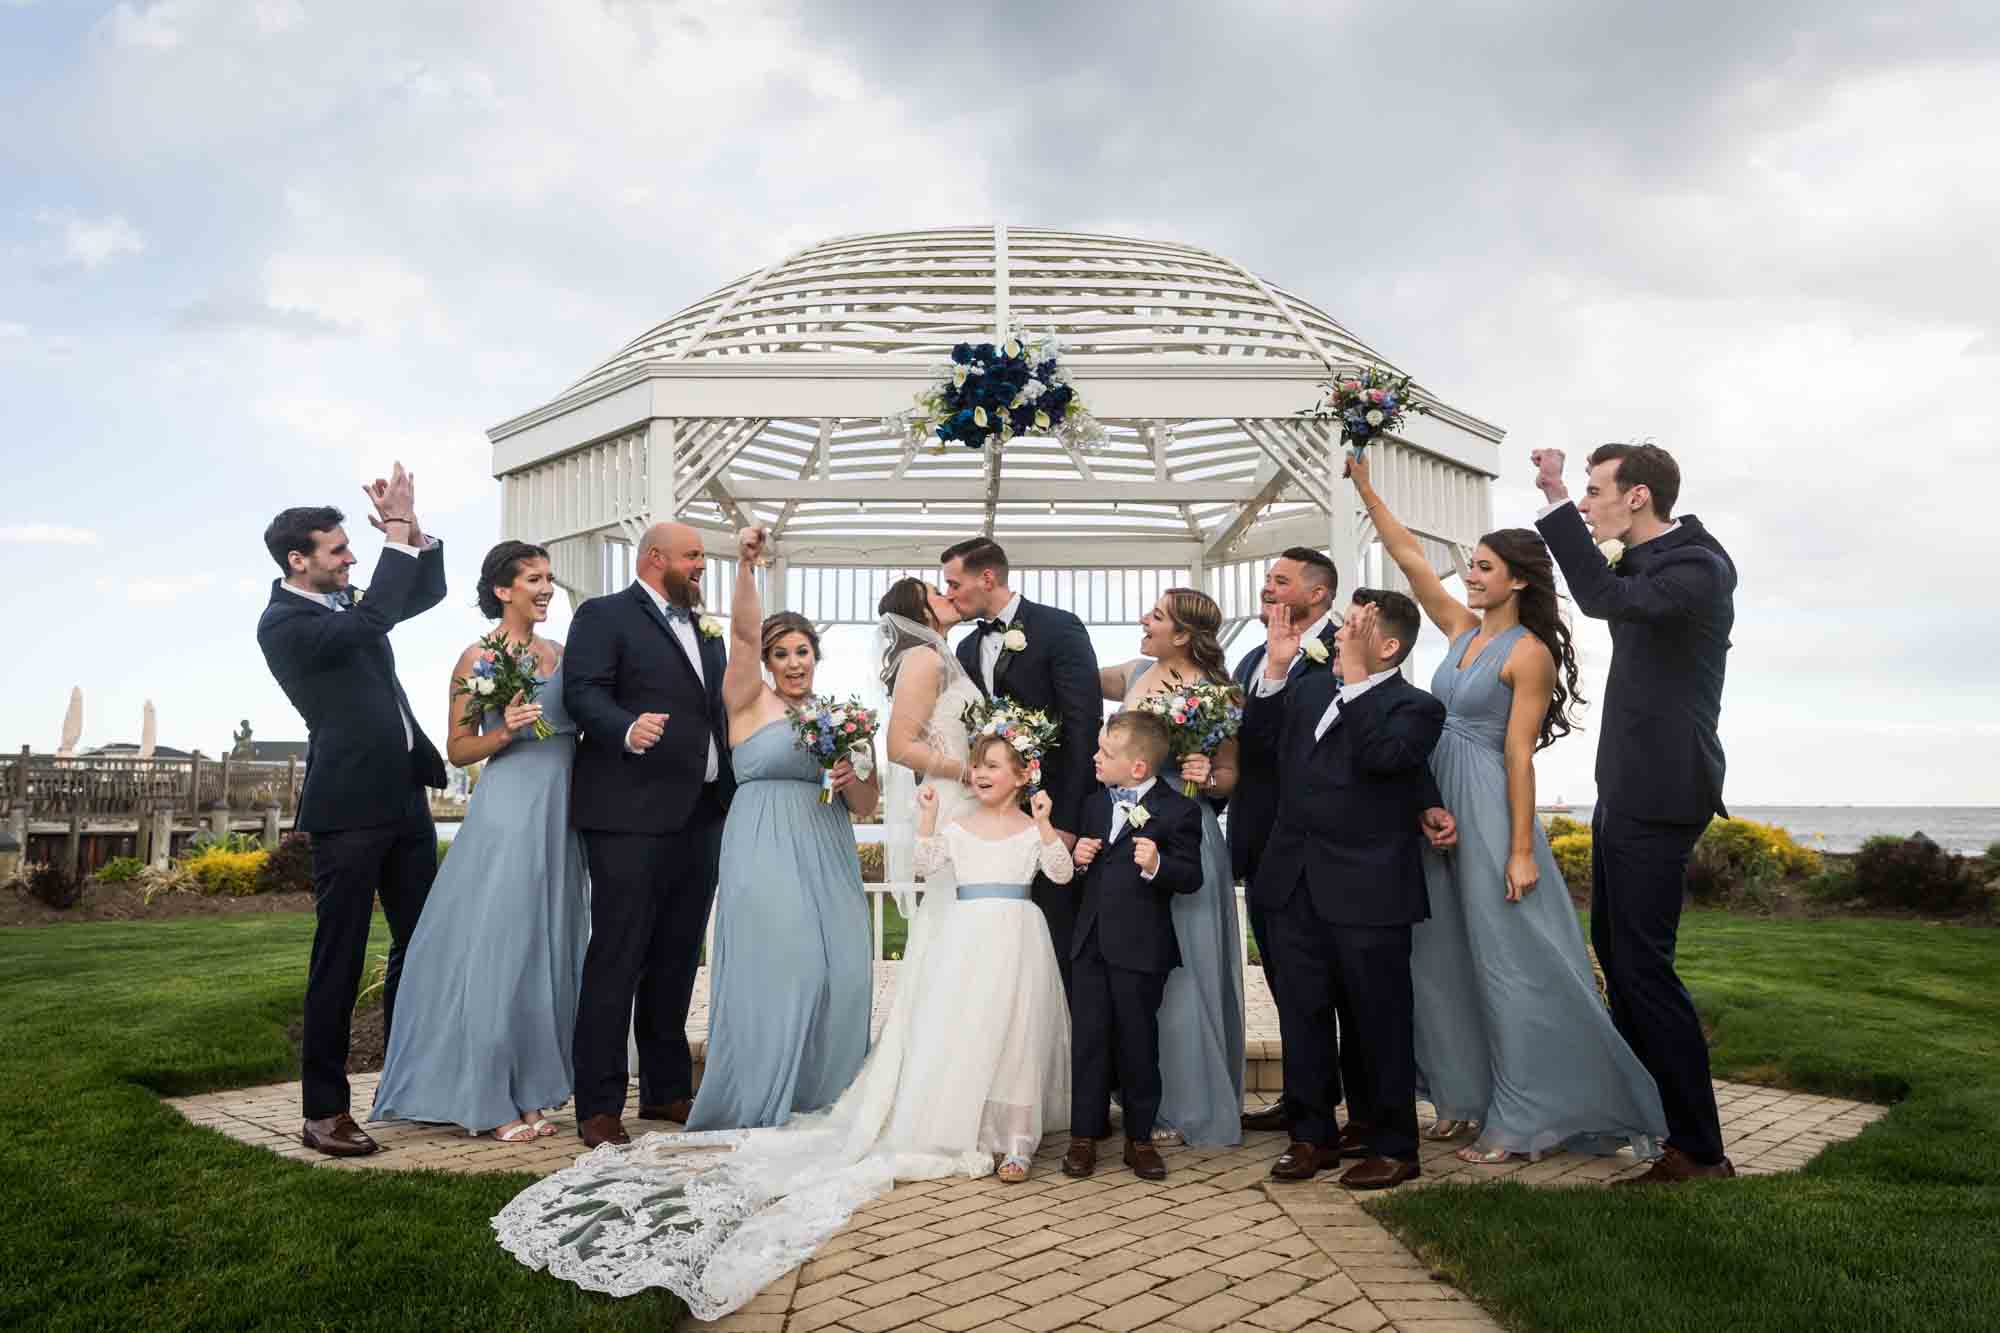 Bride and groom kissing in front of bridal party in front of white gazebo